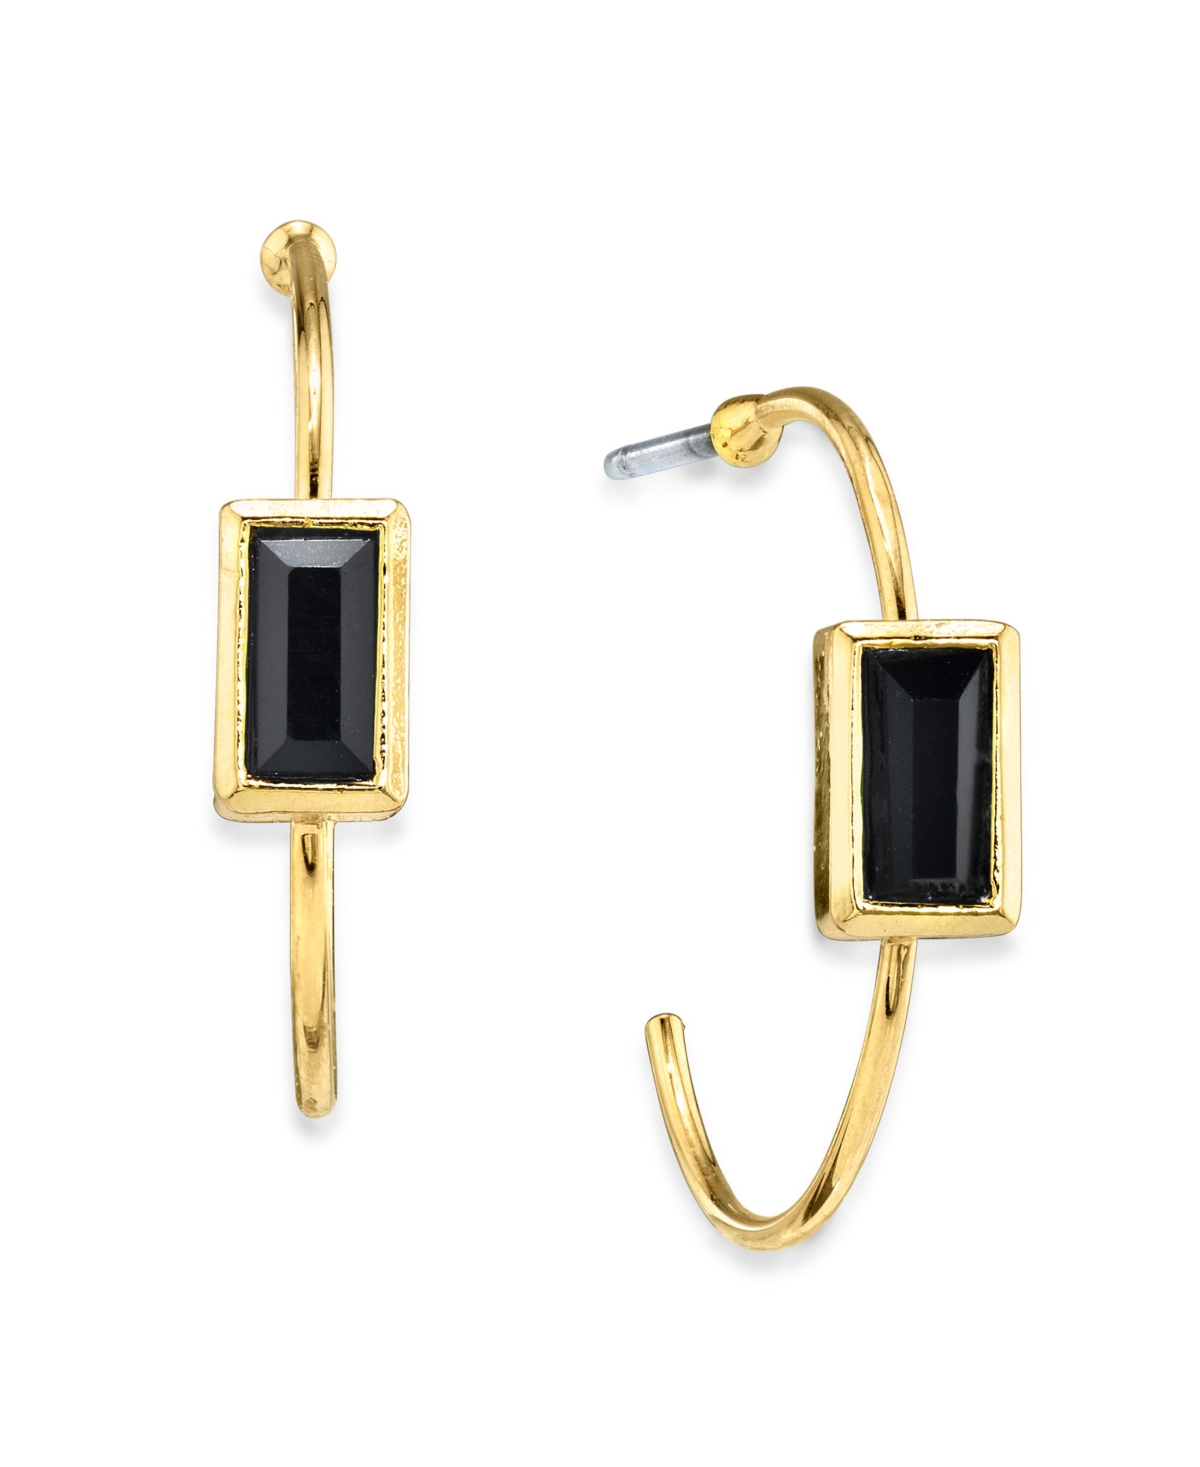 2028 14k Gold Dipped Square Crystal Open Hoop Stainless Steel Post Small Earrings In Black